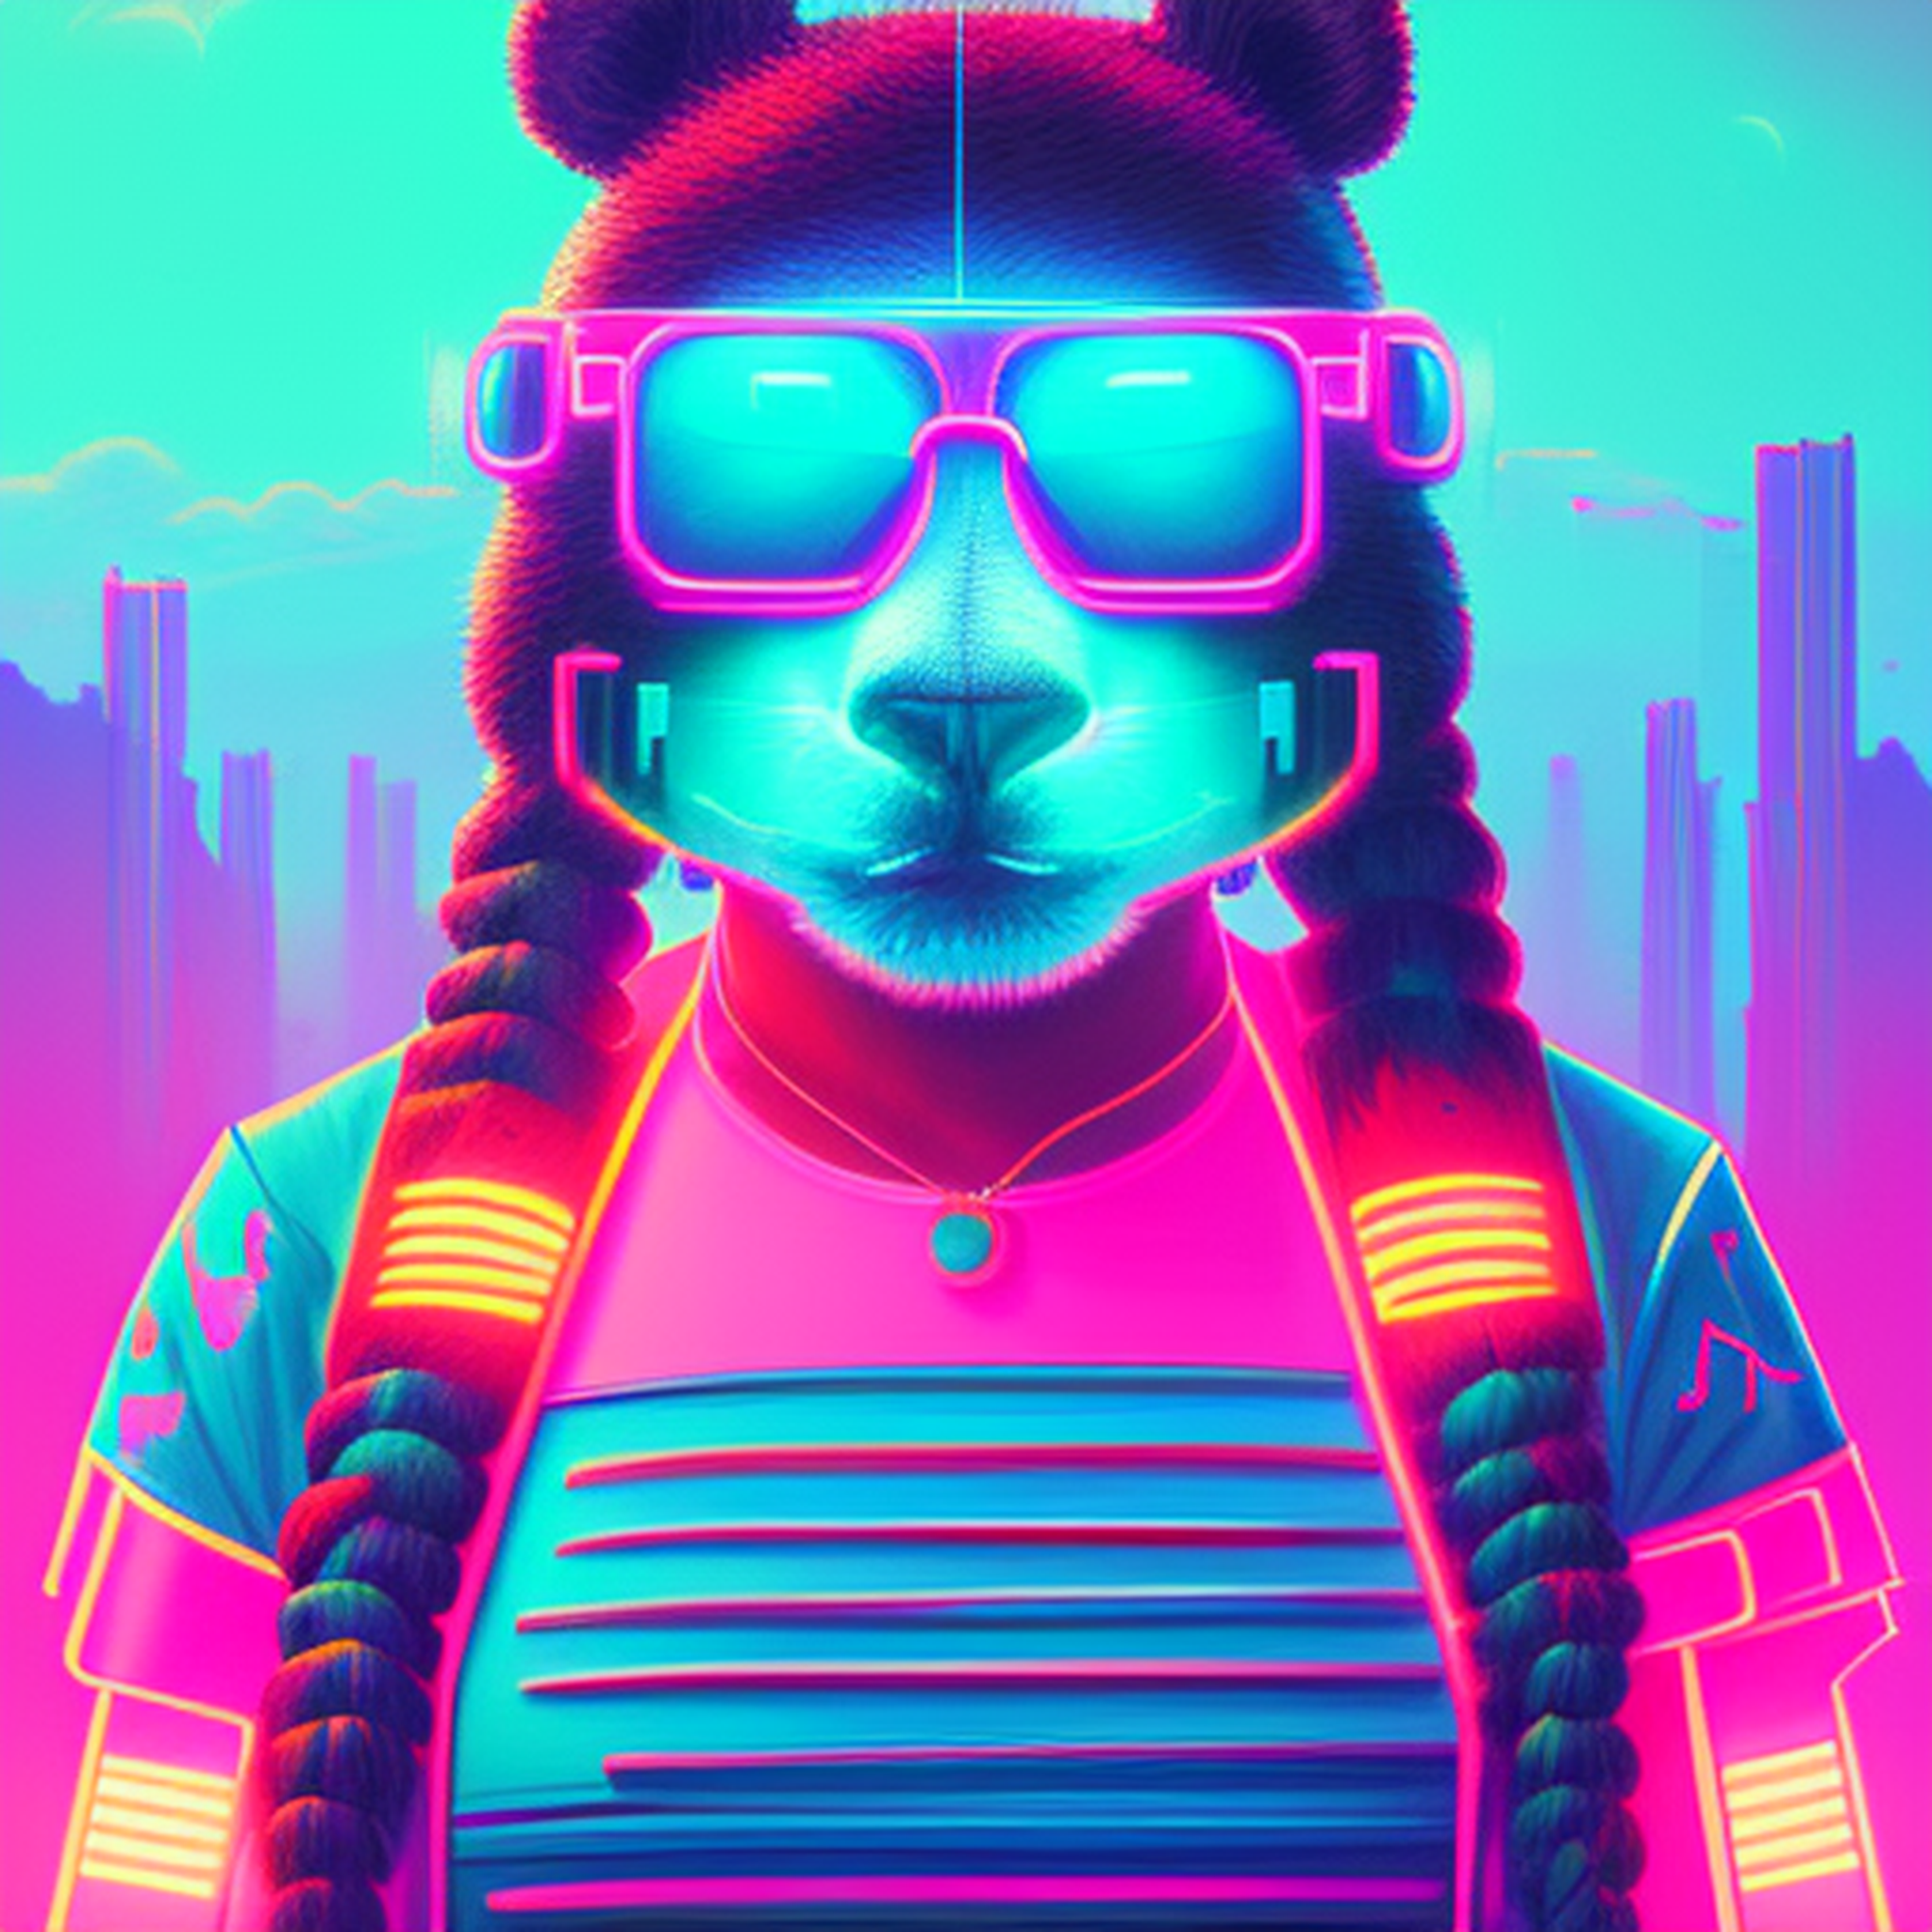 Do you love Syntwave? [2] - Now raccoon - My, Cyberpunk, Synthwave, Animals, Deep Learning, Art, Incredible, Stable diffusion, Longpost, Creation, Funny animals, Milota, Нейронные сети, Artificial Intelligence, Digital, Computer graphics, Midjourney, 2D, Characters (edit), Artstation